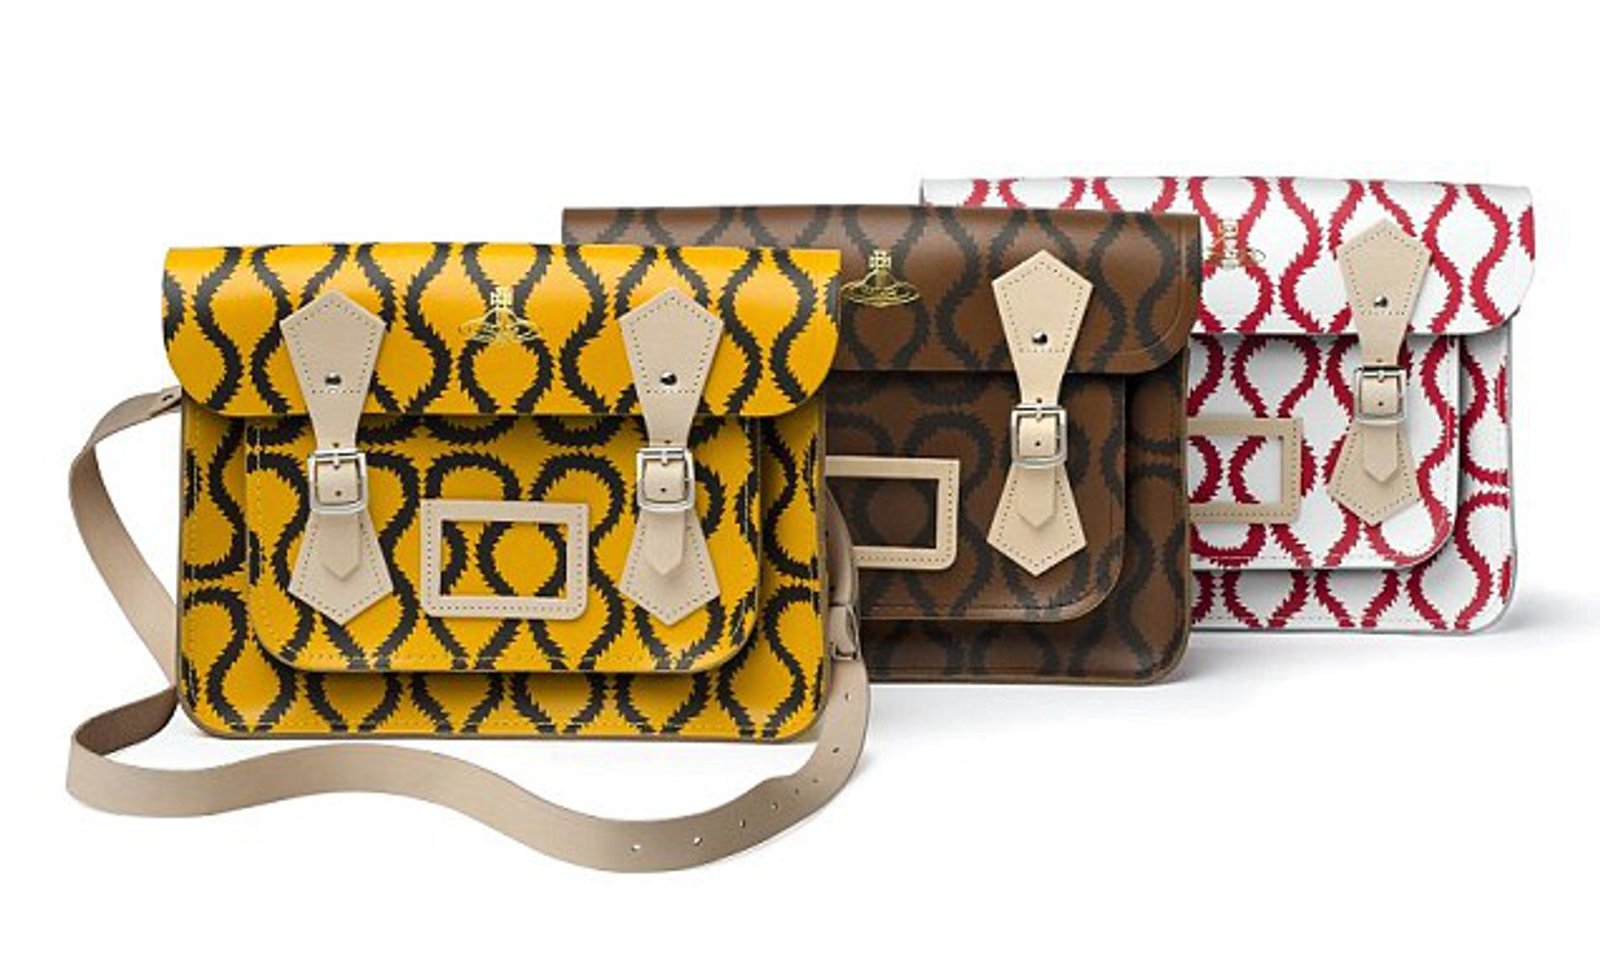 The Cambridge Satchel Company team up with Dame Vivienne